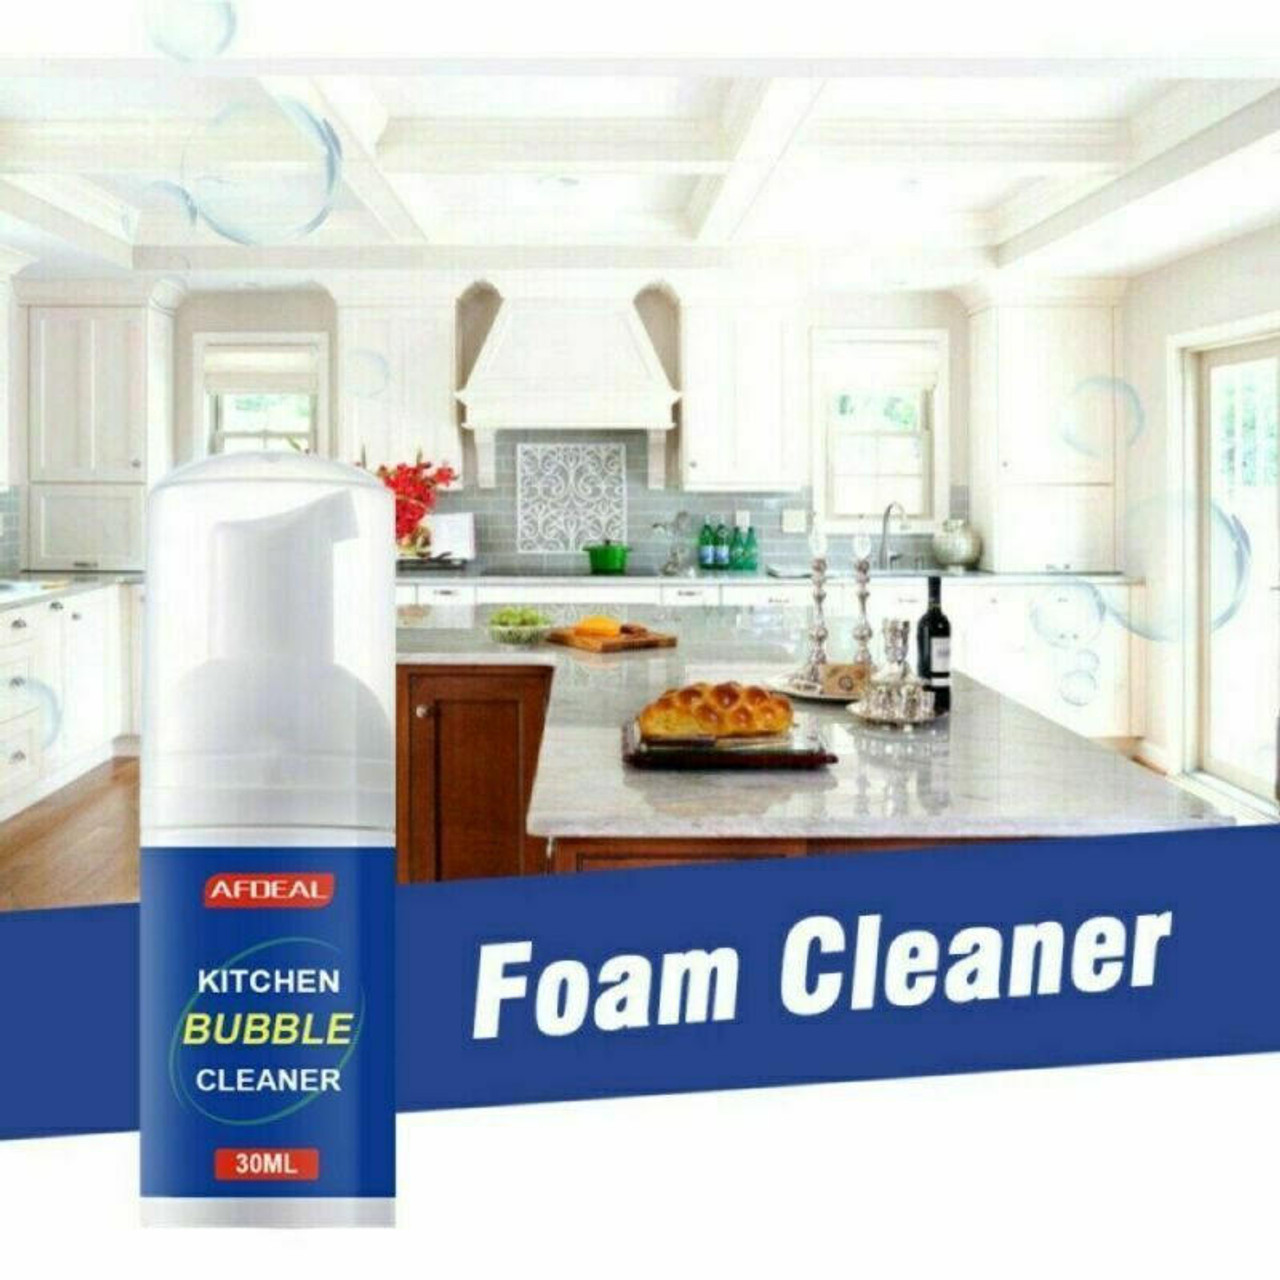 https://cdn11.bigcommerce.com/s-zrh8tkpr8d/images/stencil/1280x1280/products/9984/30472/2pc-multi-purpose-cleaning-bubble-cleaner-spray-foam-kitchen-grease-dirt-removal__08051.1665763929.jpg?c=2